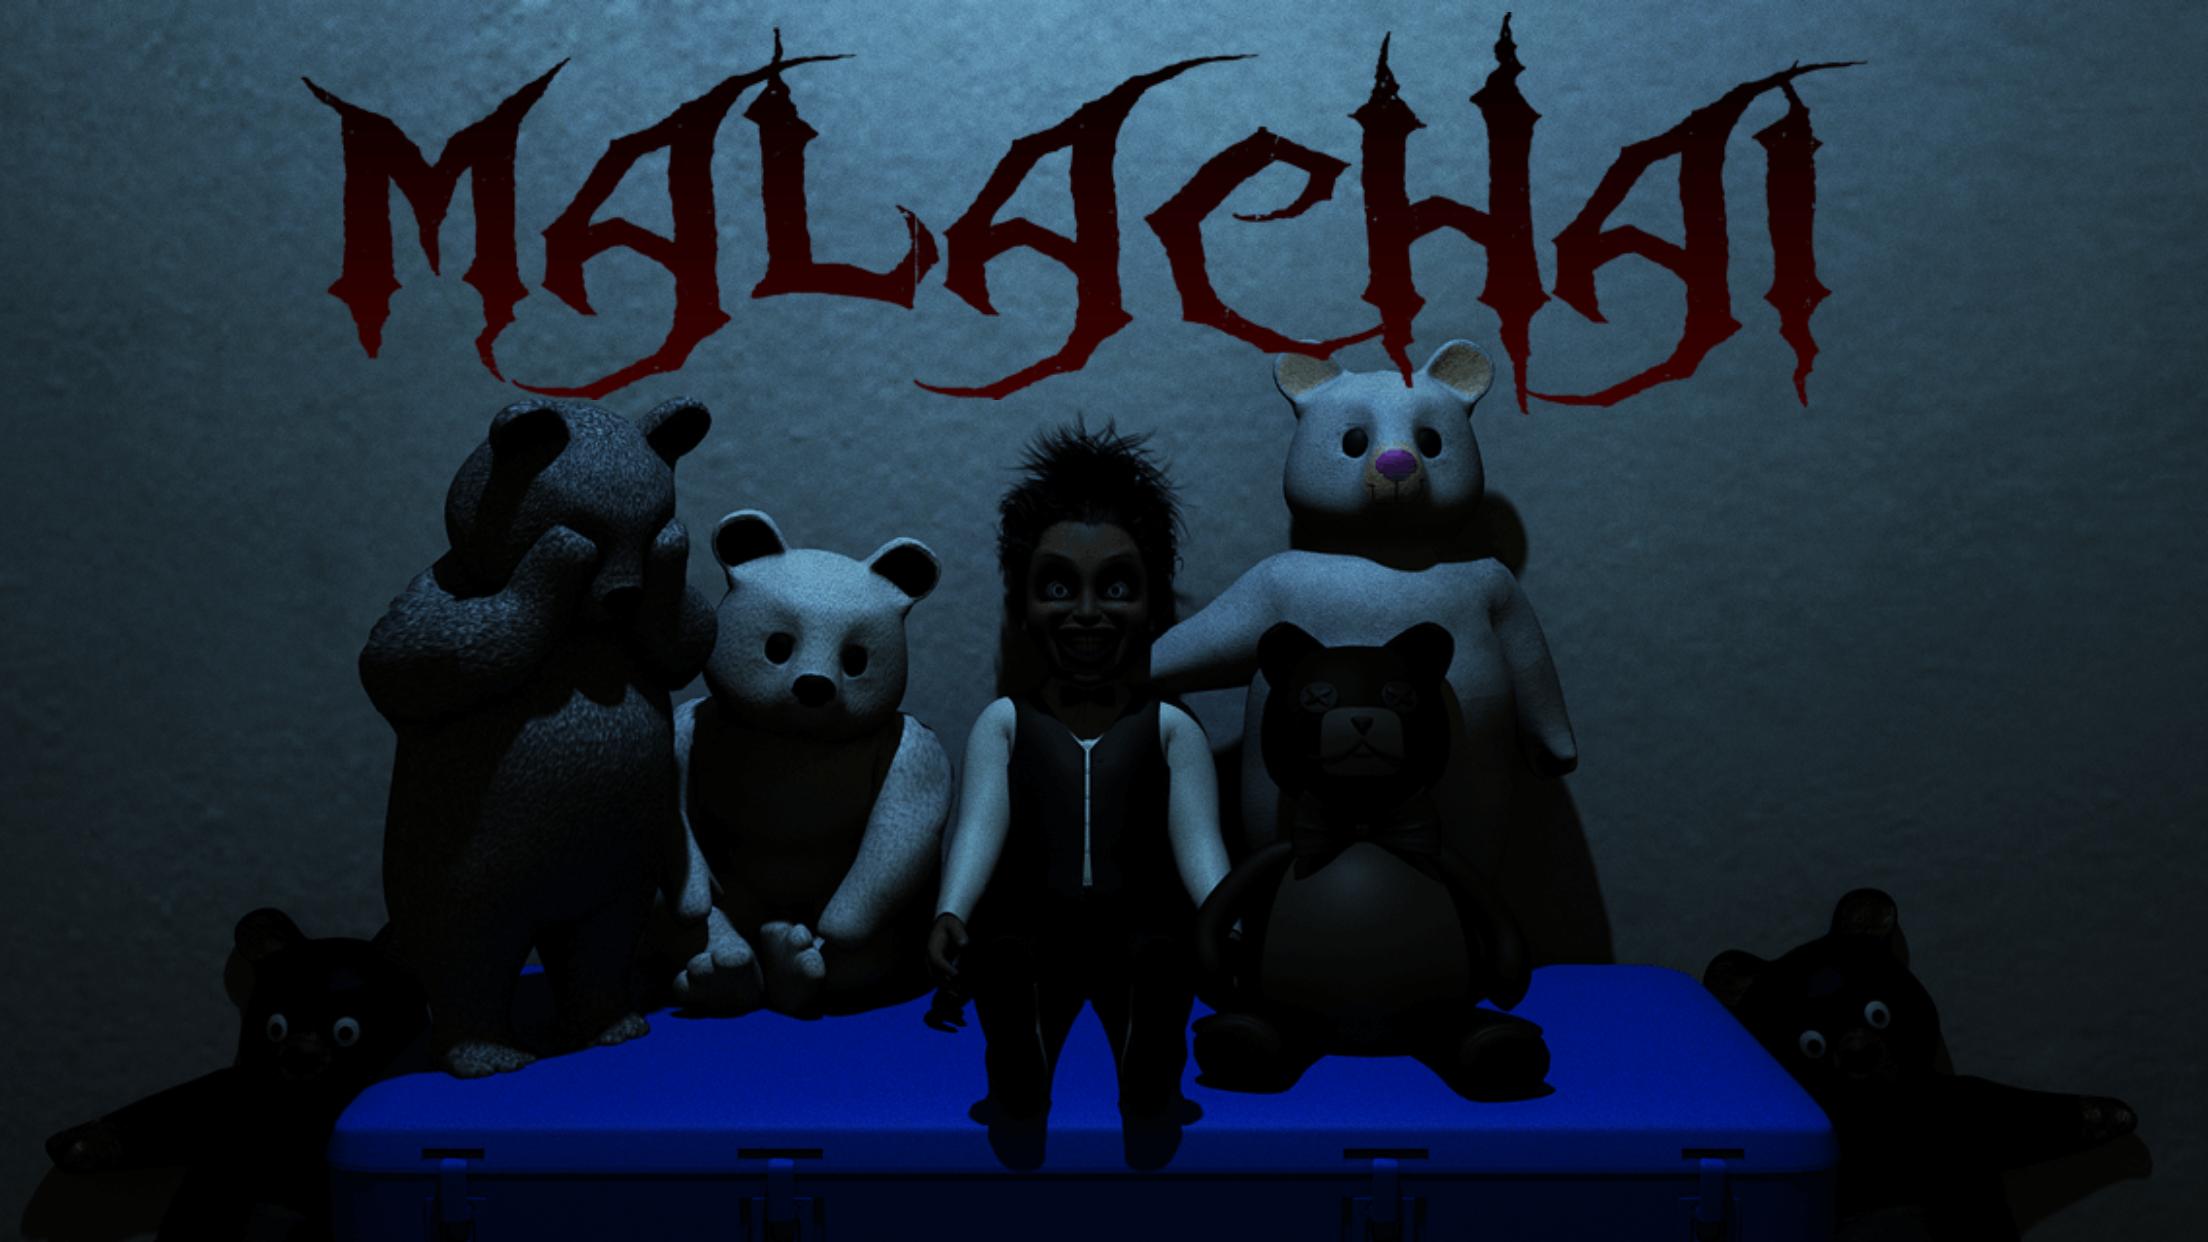 Malachai Horror Jumpscare For Android Apk Download - creepiest game on roblox jumpscares